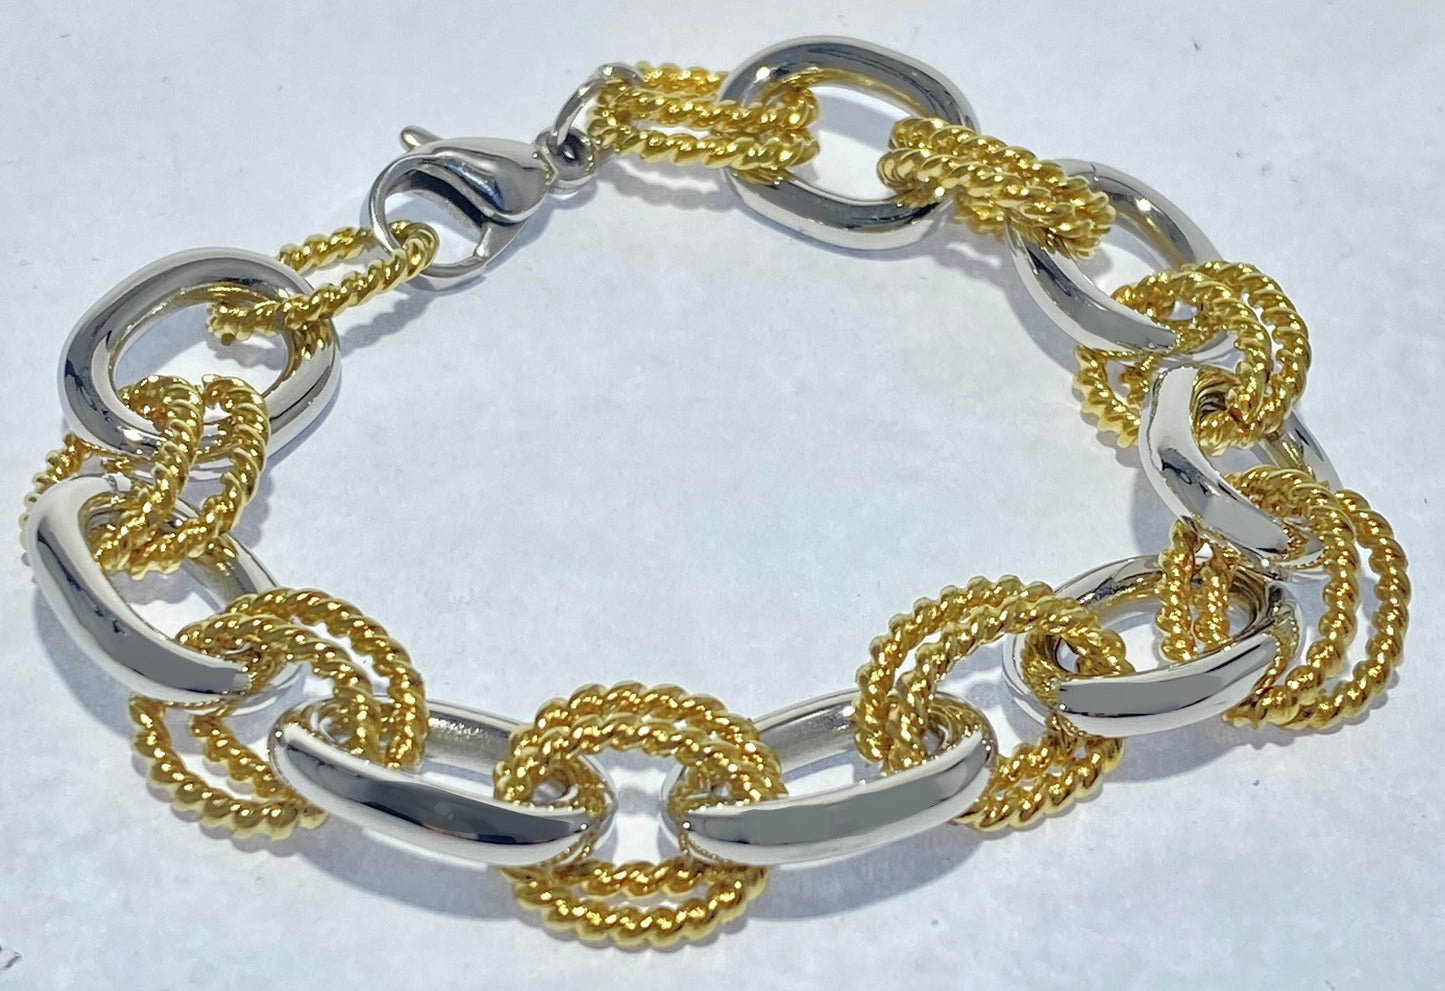 JEWELRY FASHION Gold Rope Rounds and Silver Polish Link 20"